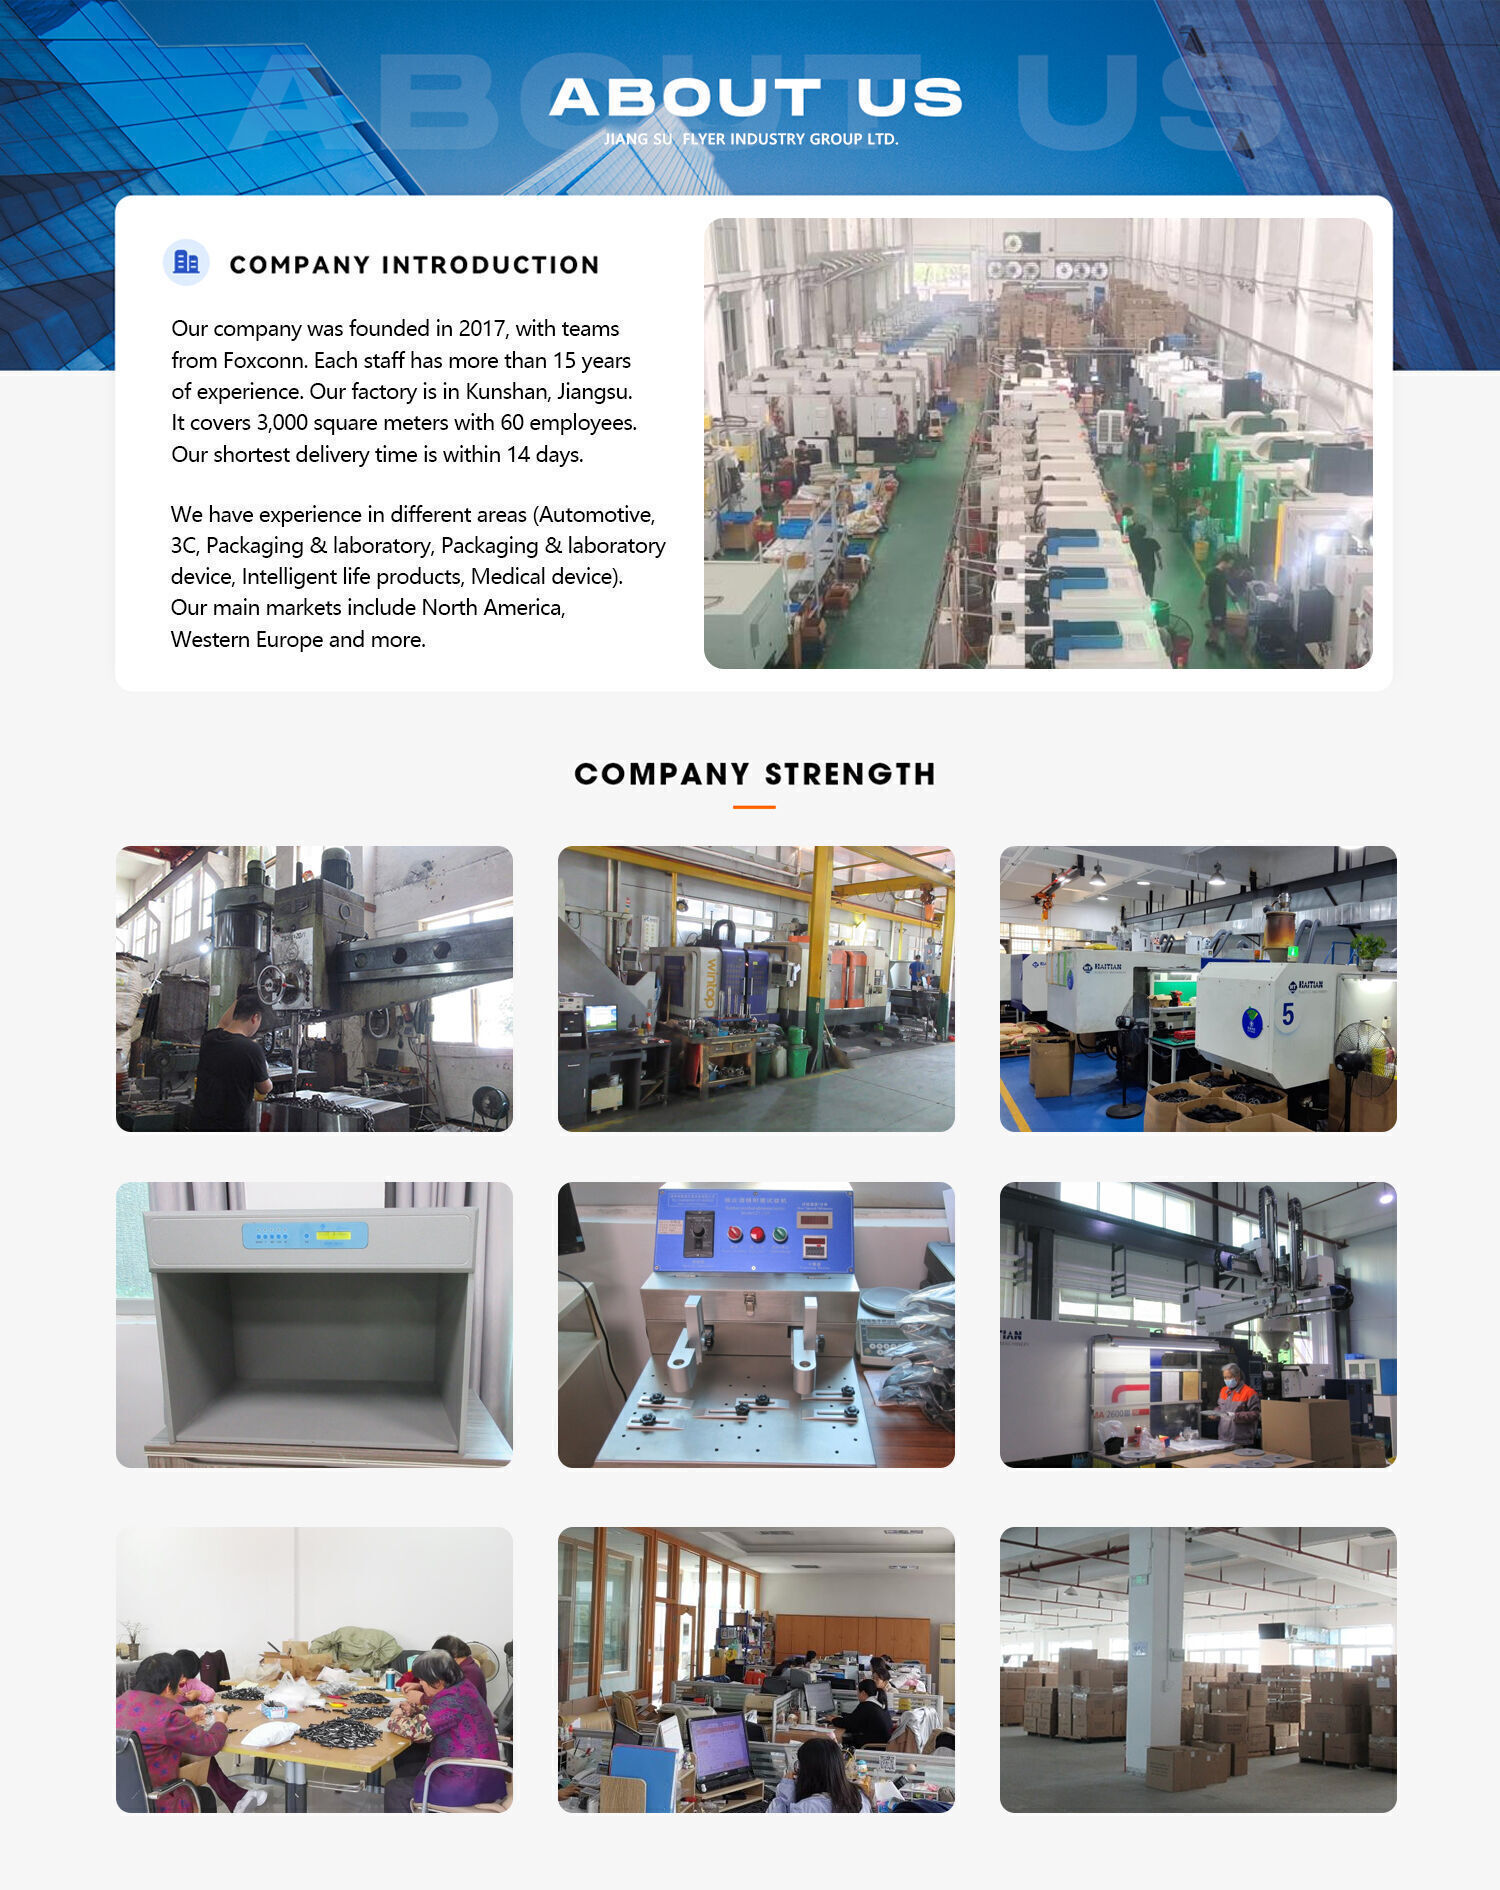 Sale　Manufacturer　High　Factory　Buy　Global　Injection　Mould　Injection　Plastic　Injection　Maker　4000　Mold　USD　Wholesale　Plastic　Injection　Customized　at　Molds　Products　Mold　Mold　China　Sources